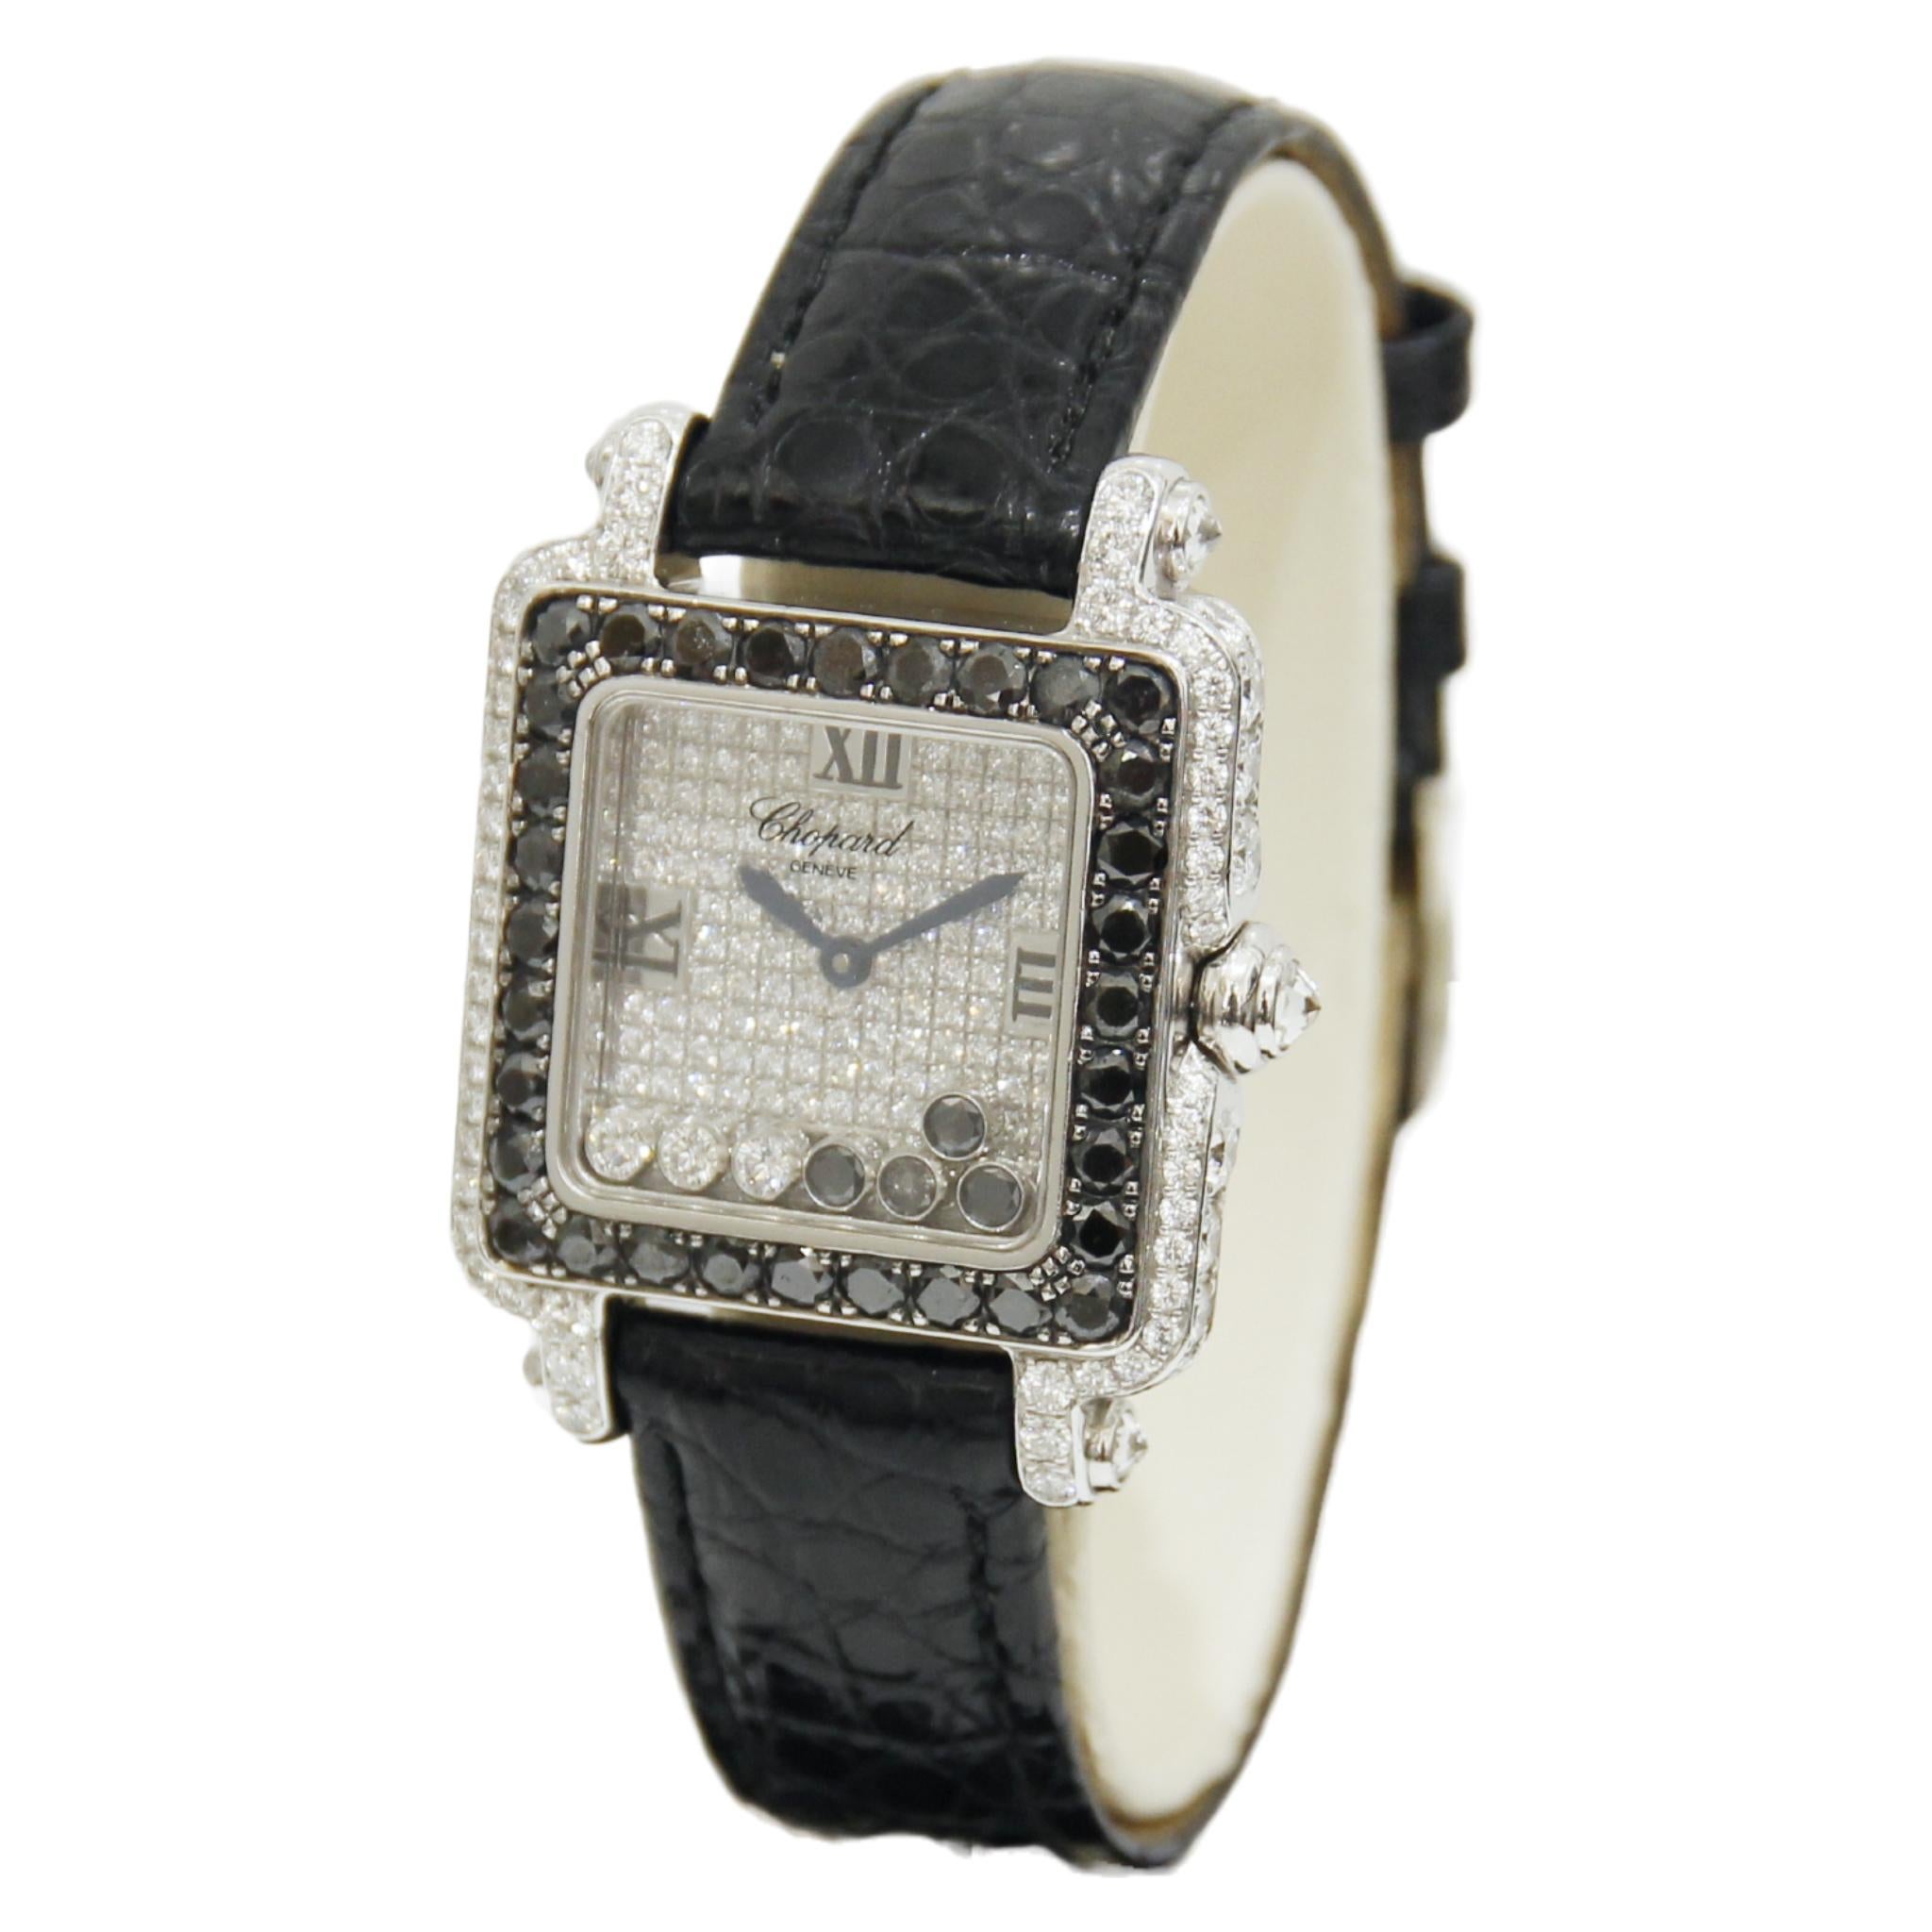 Brand: Chopard 
Model: Happy Sport
Reference number:  27/6730-50
Movement: Quartz 
Case Material: White Gold
Bracelet material: Black Alligator Strap
Condition: Pre Owned, Fair (Shows some signs of wear)
Scope of delivery: No Original Box, No